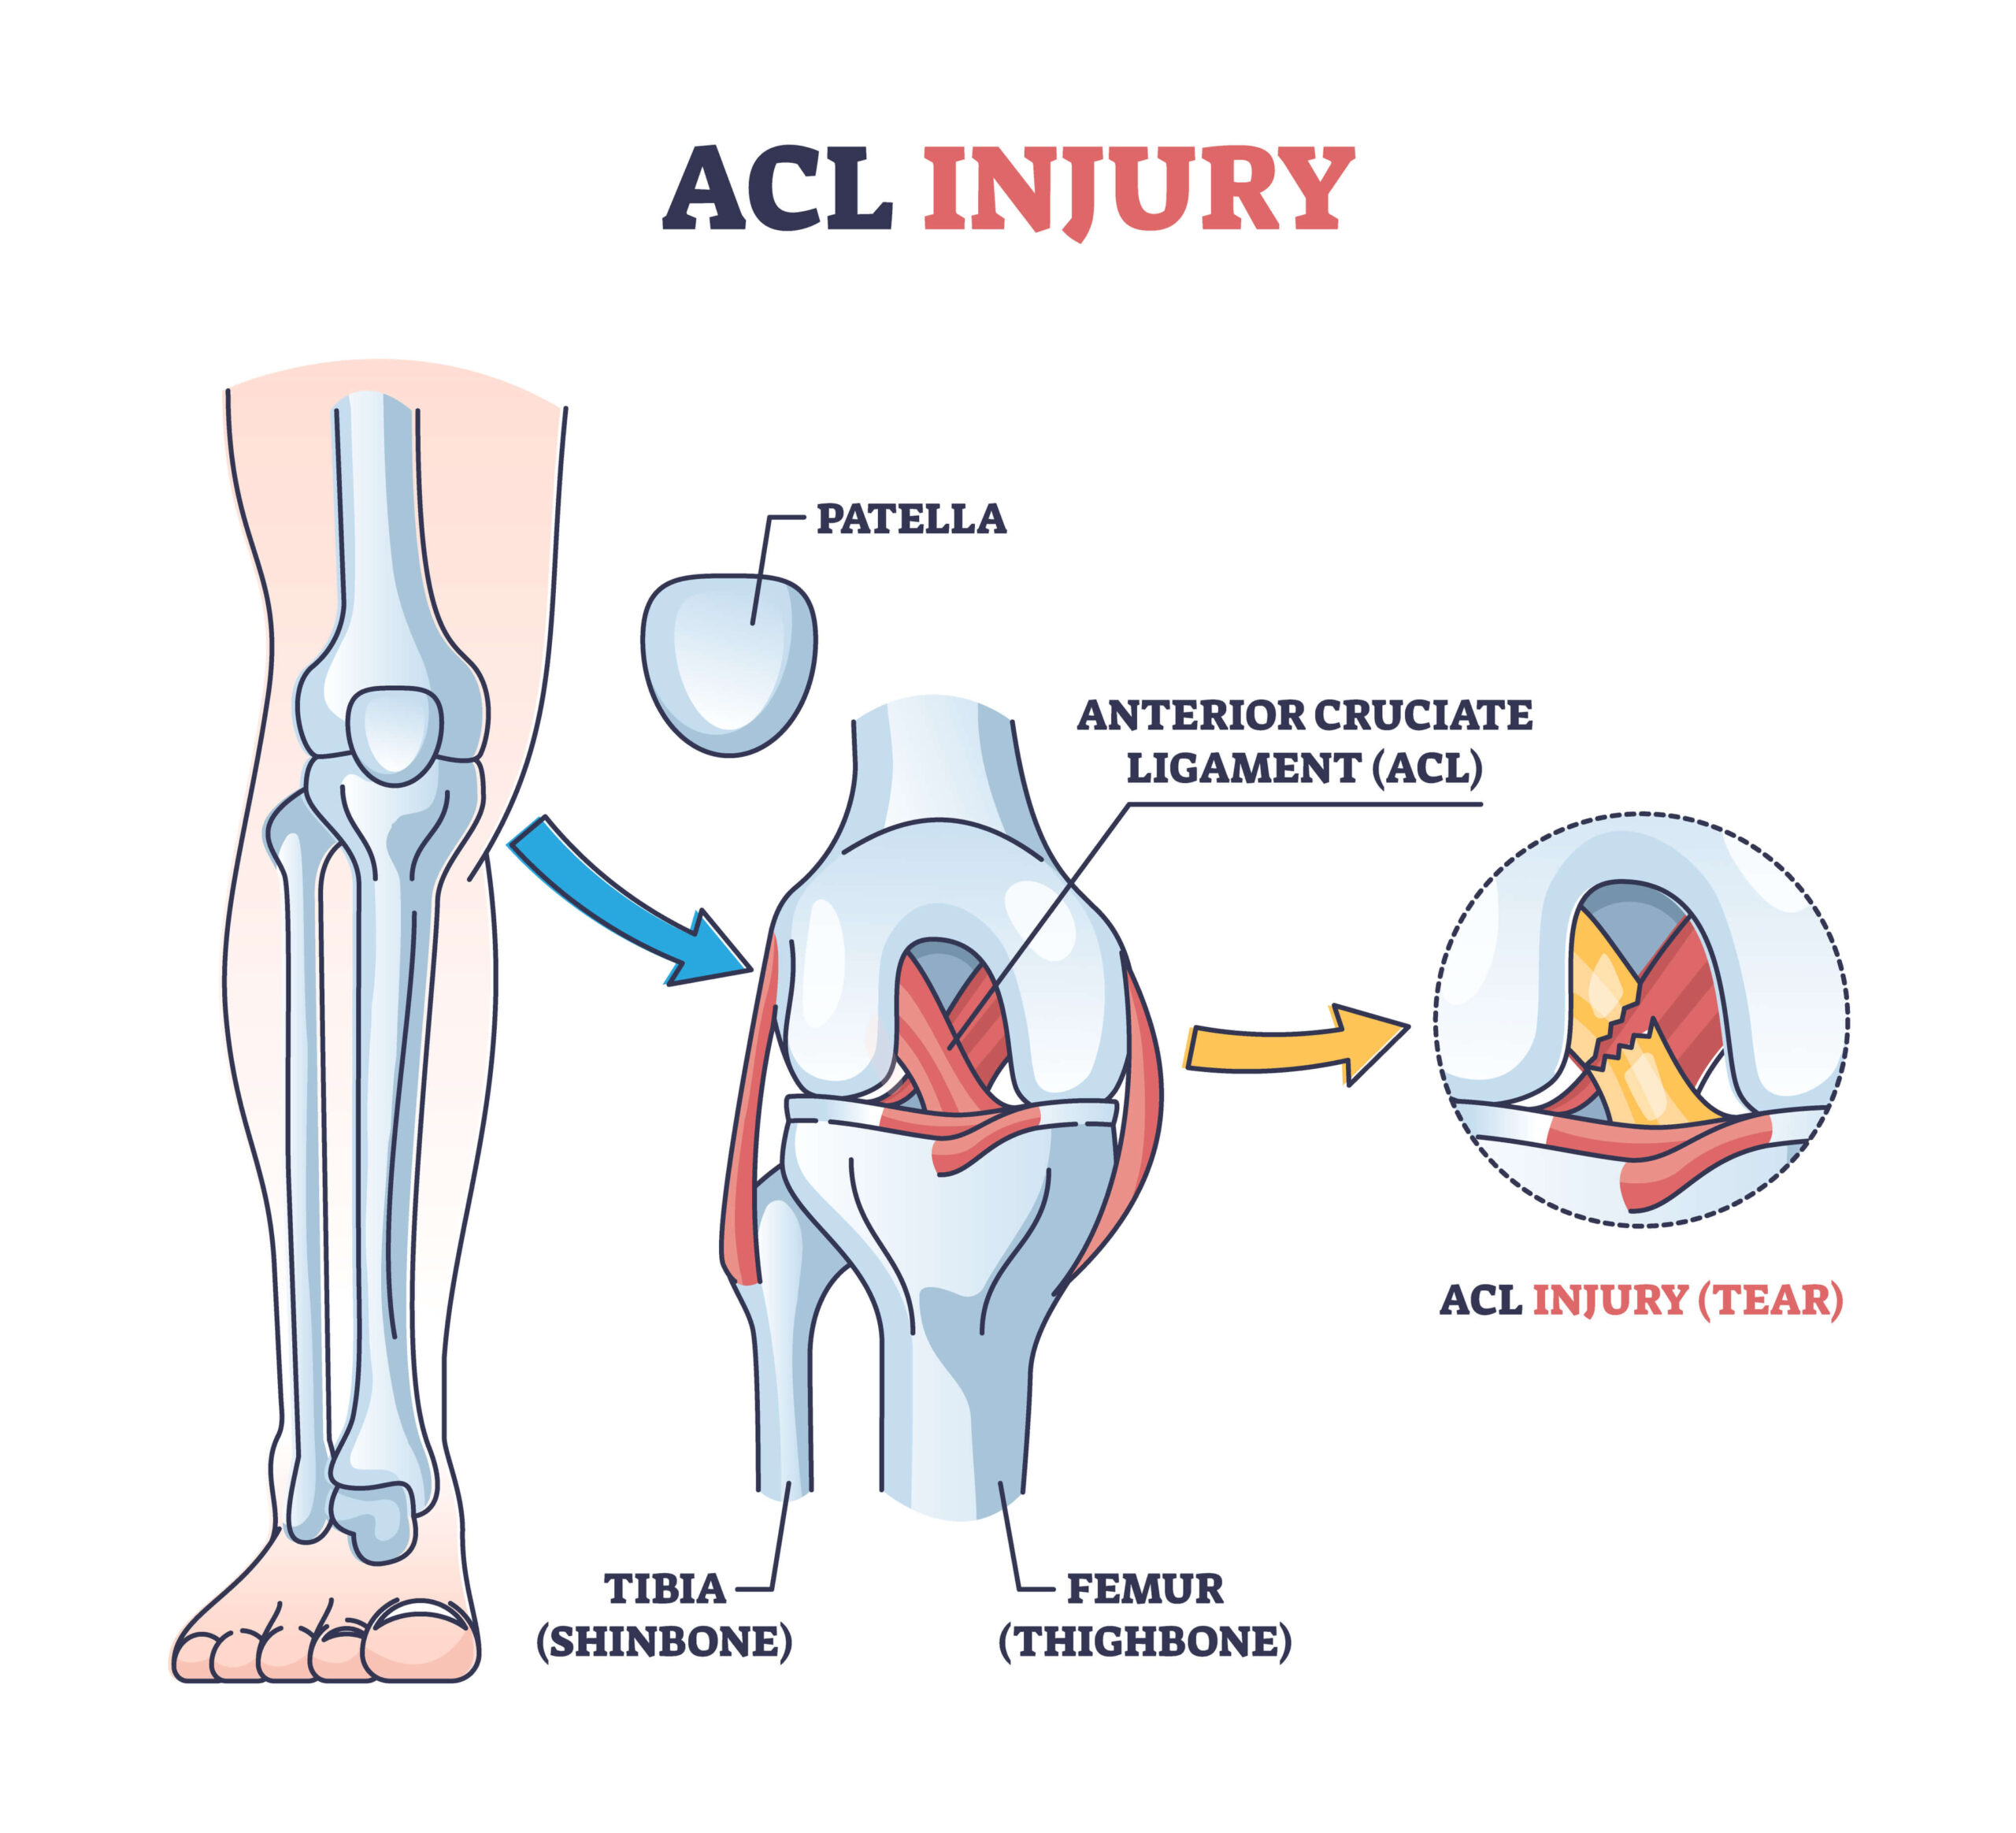 What is an ACL Injury?